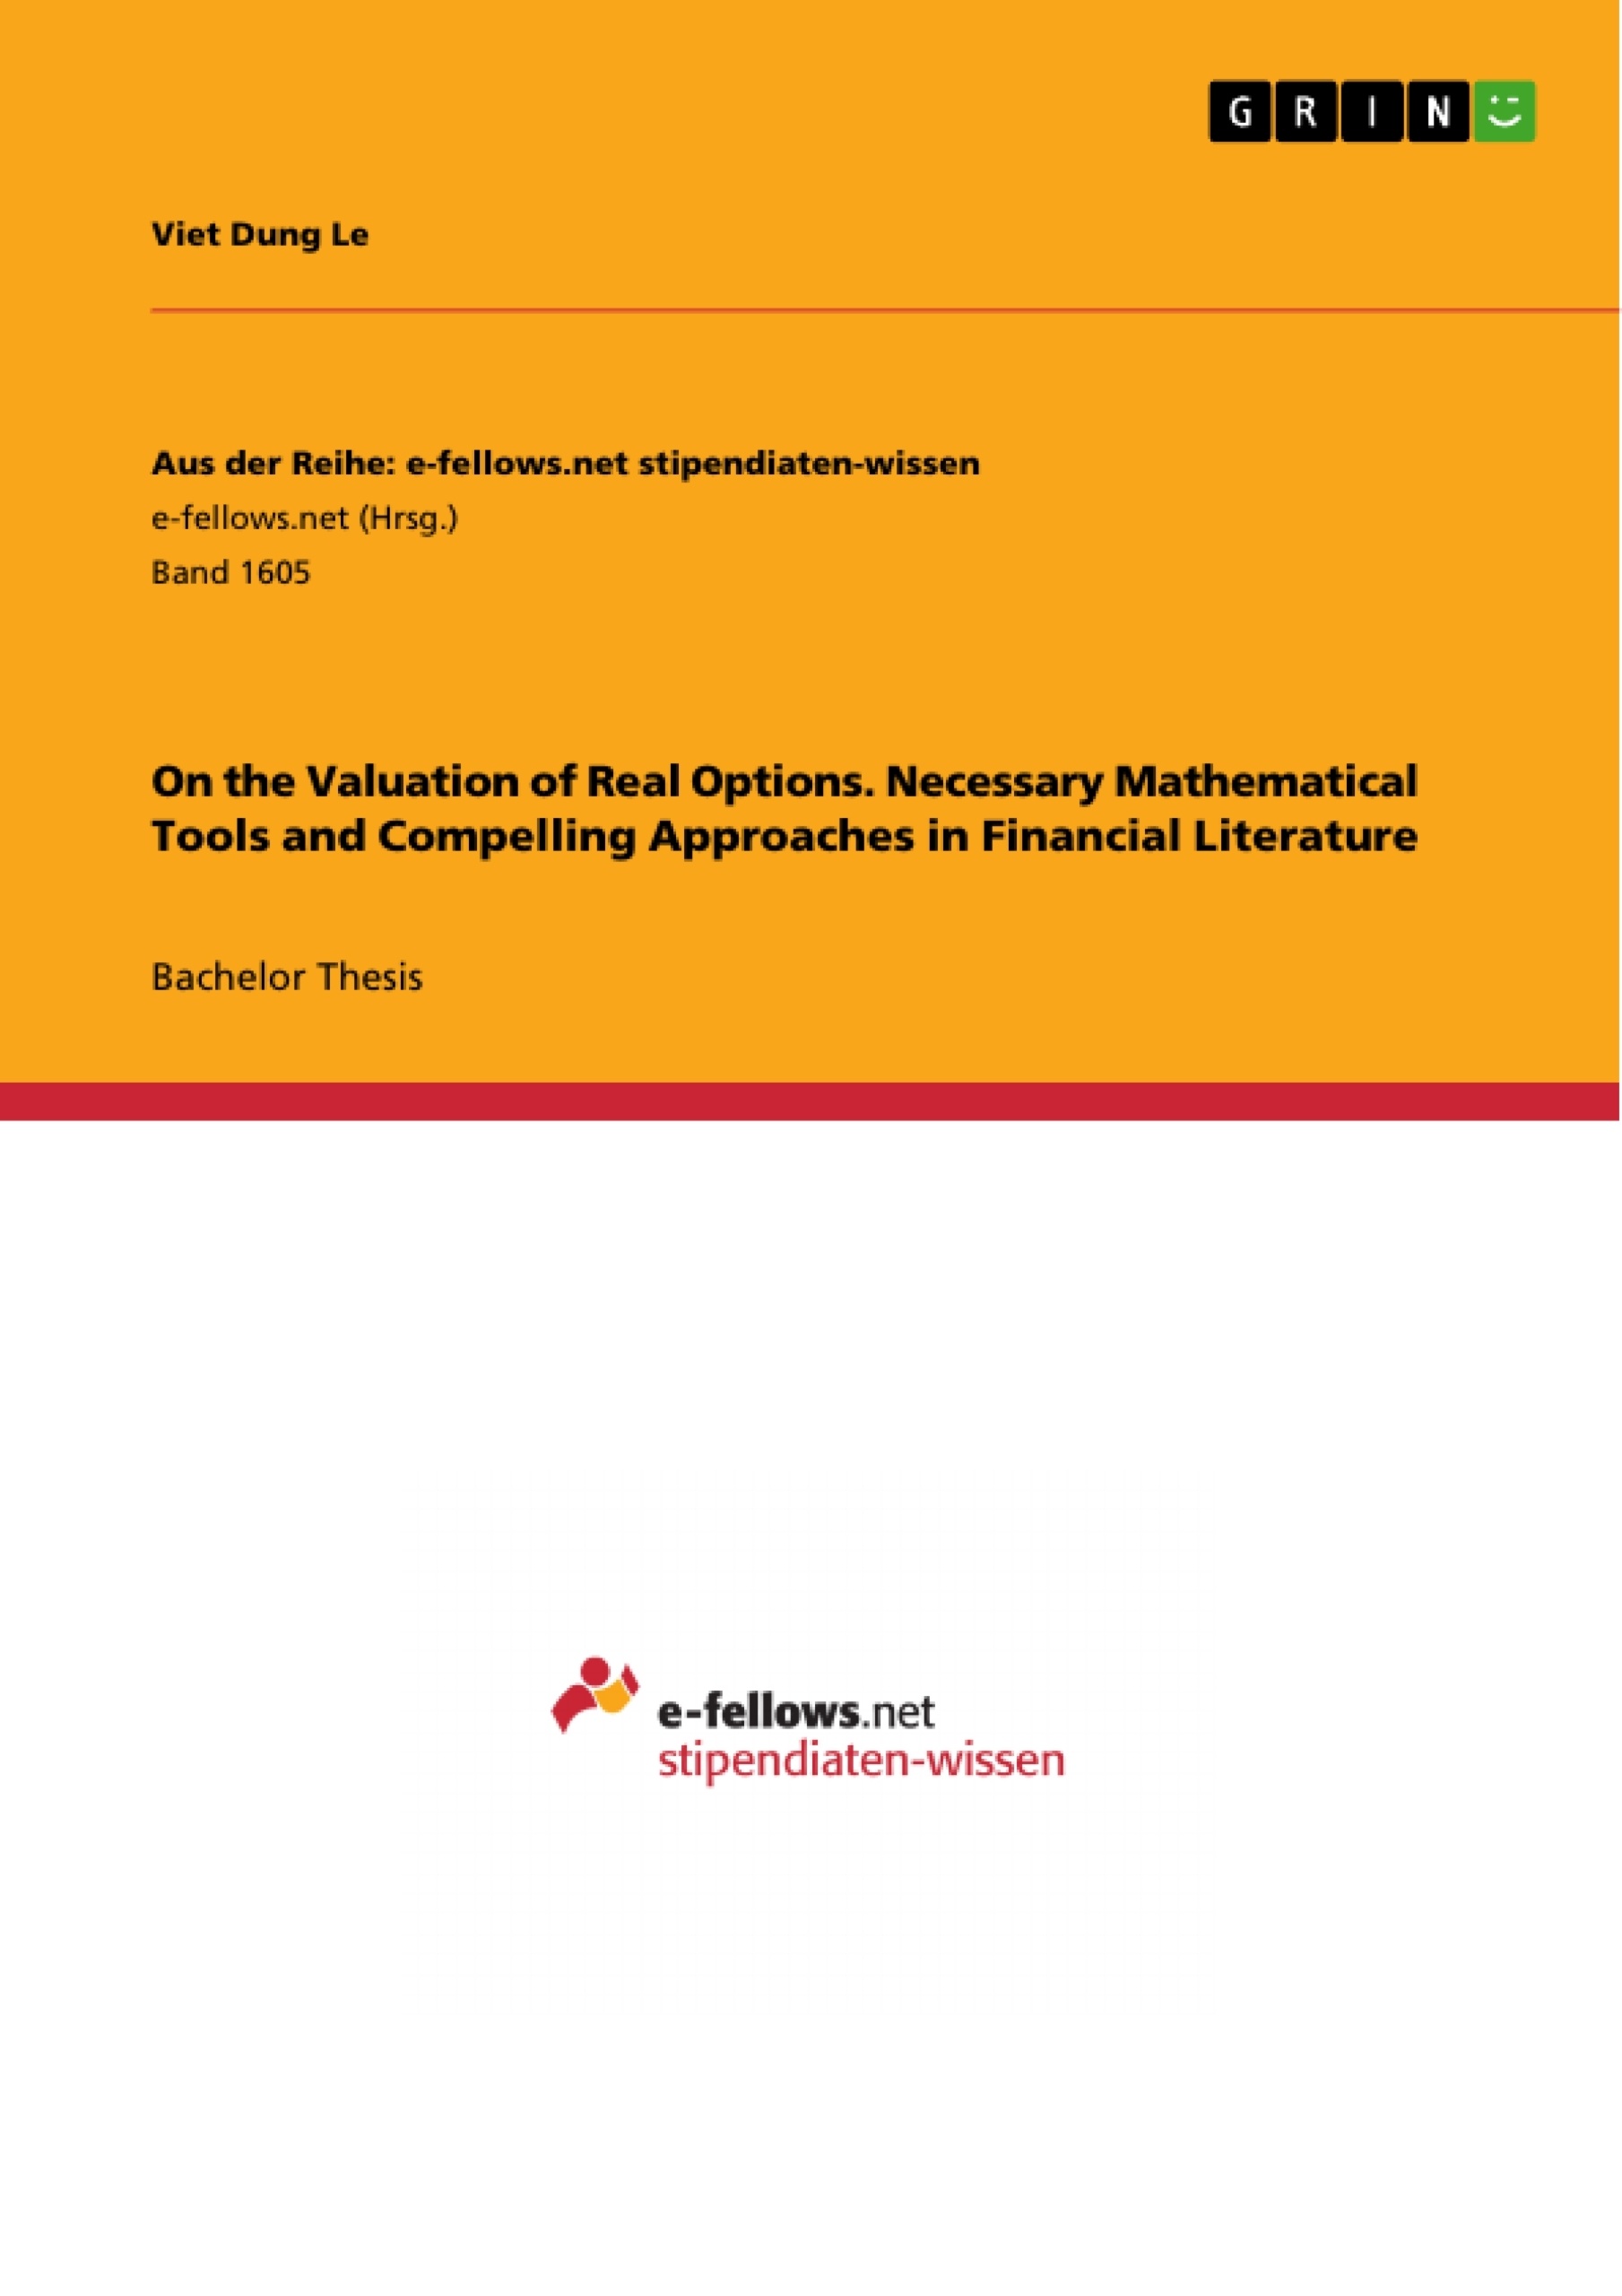 Título: On the Valuation of Real Options. Necessary Mathematical Tools and Compelling Approaches in Financial Literature